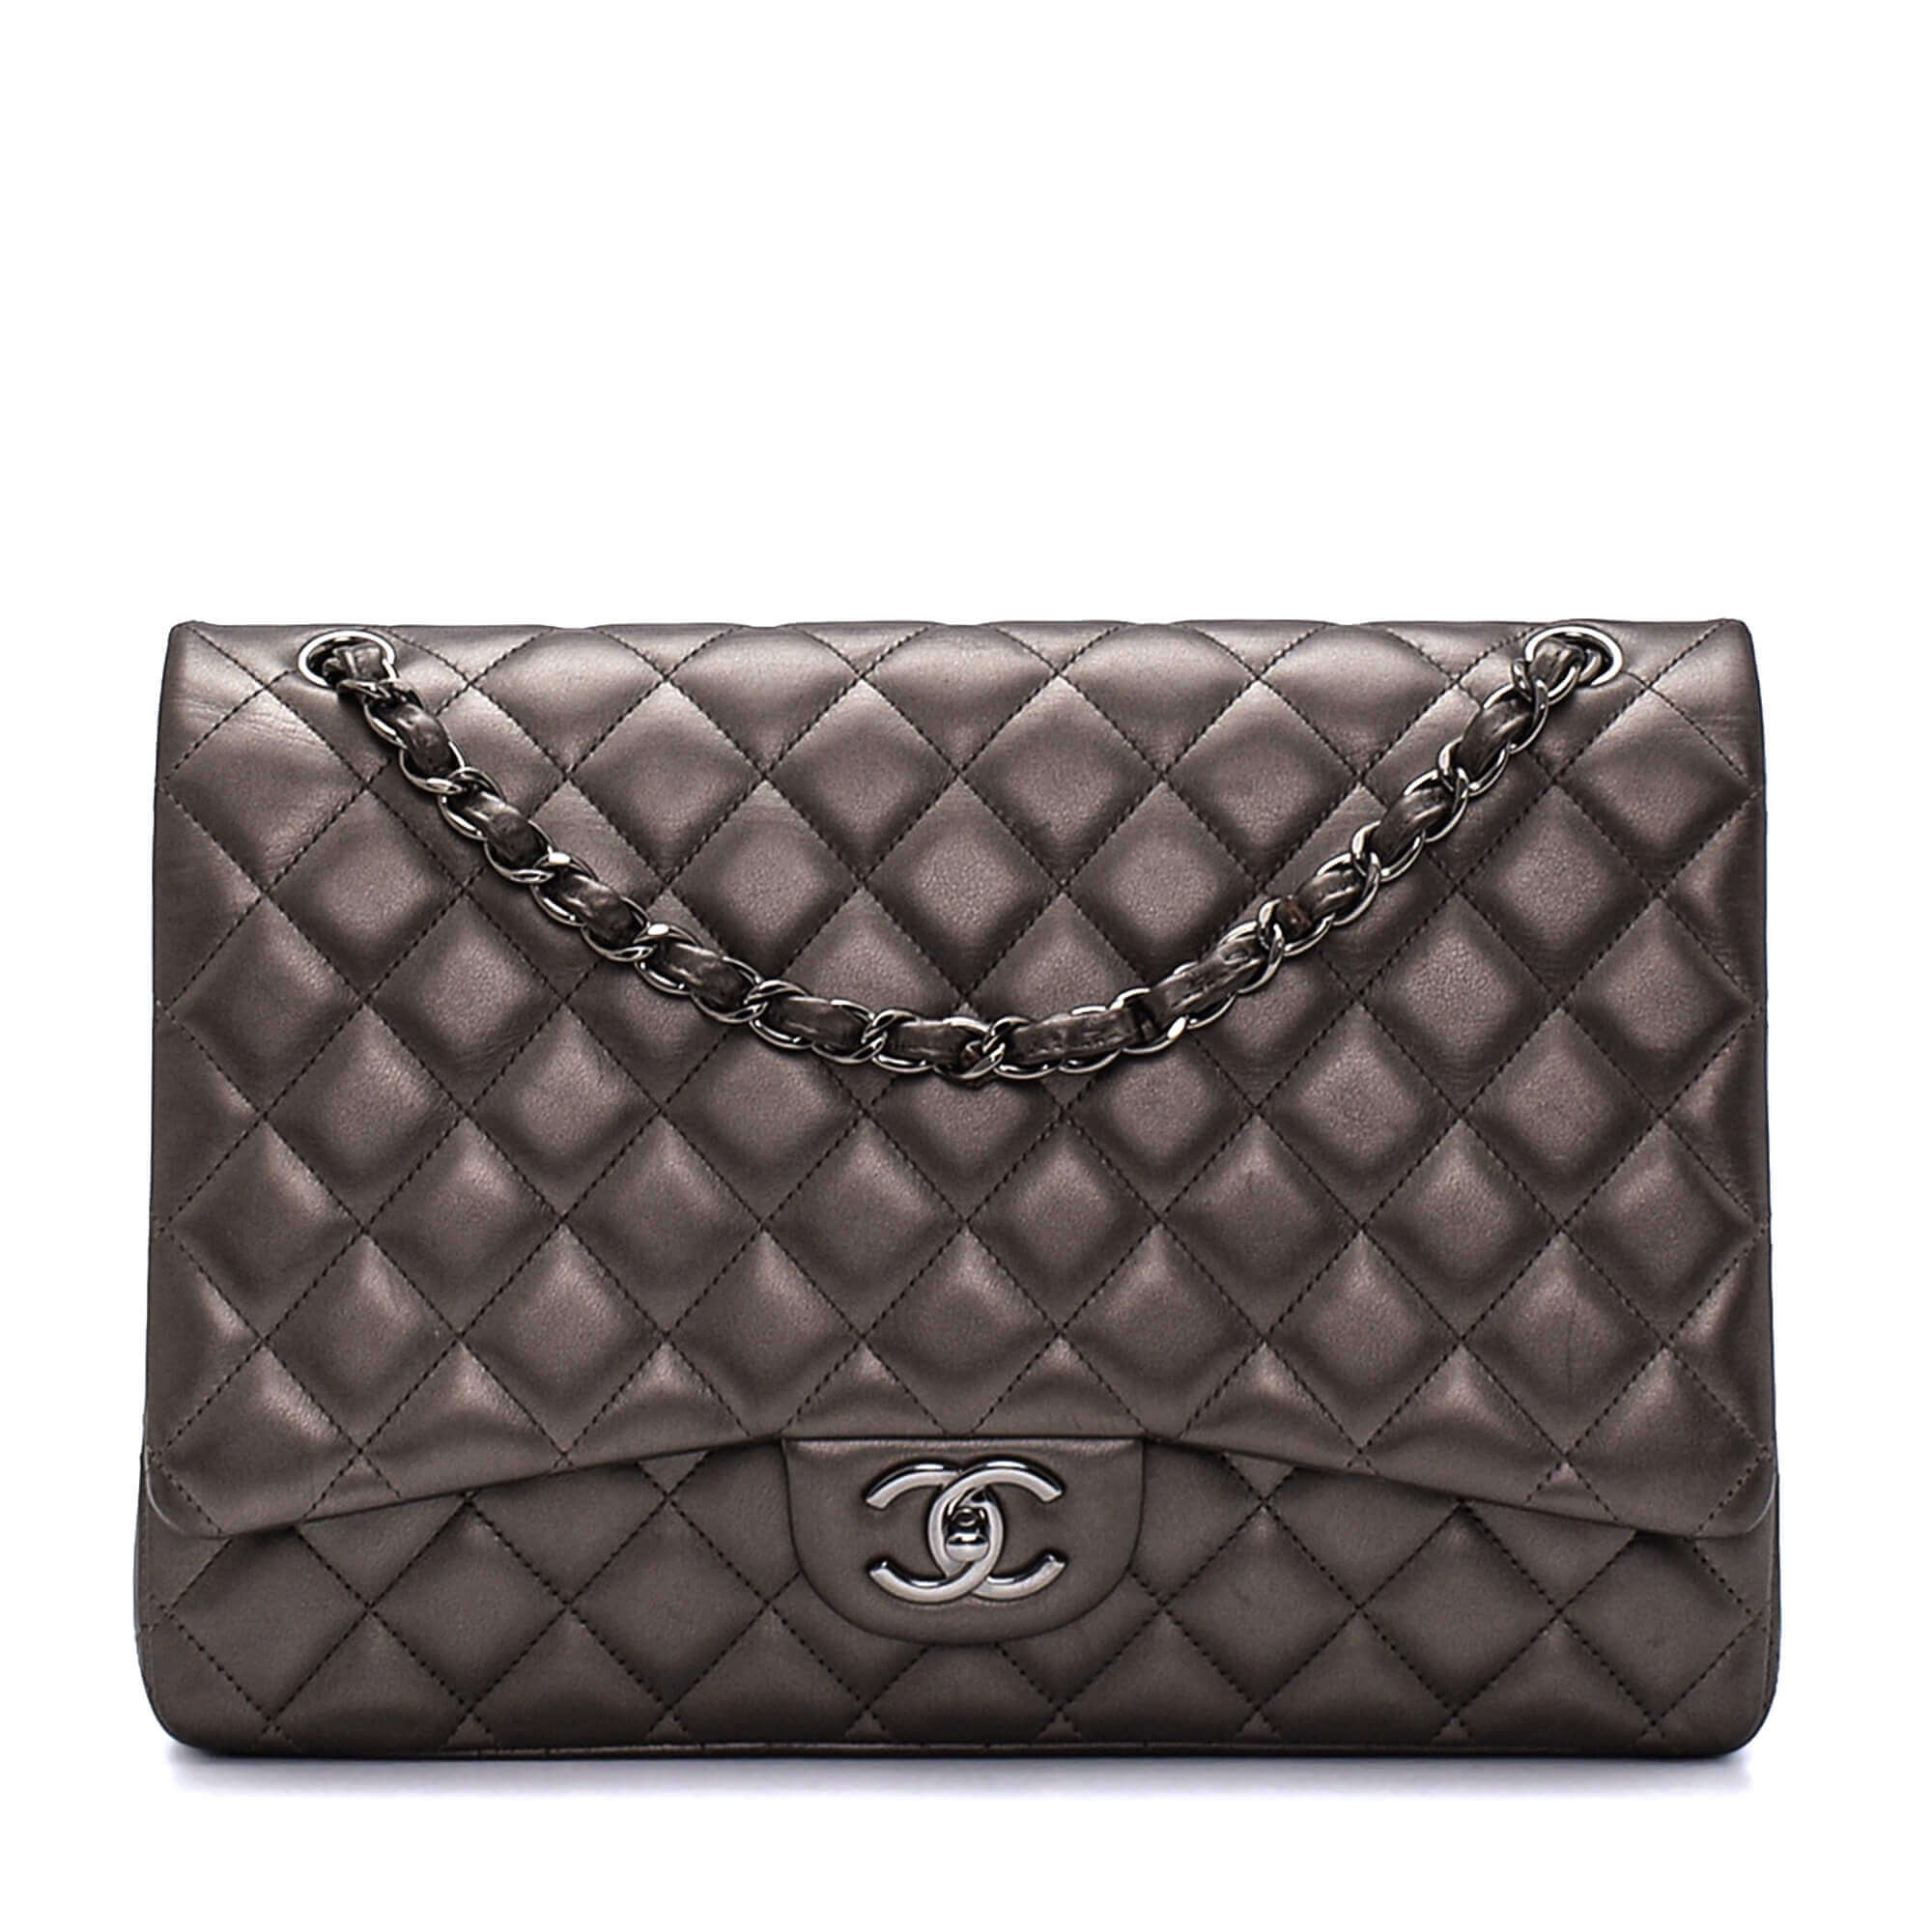 Chanel - Smooth Bronze Lambskin Quilted Double Flap Maxi Jumbo Bag